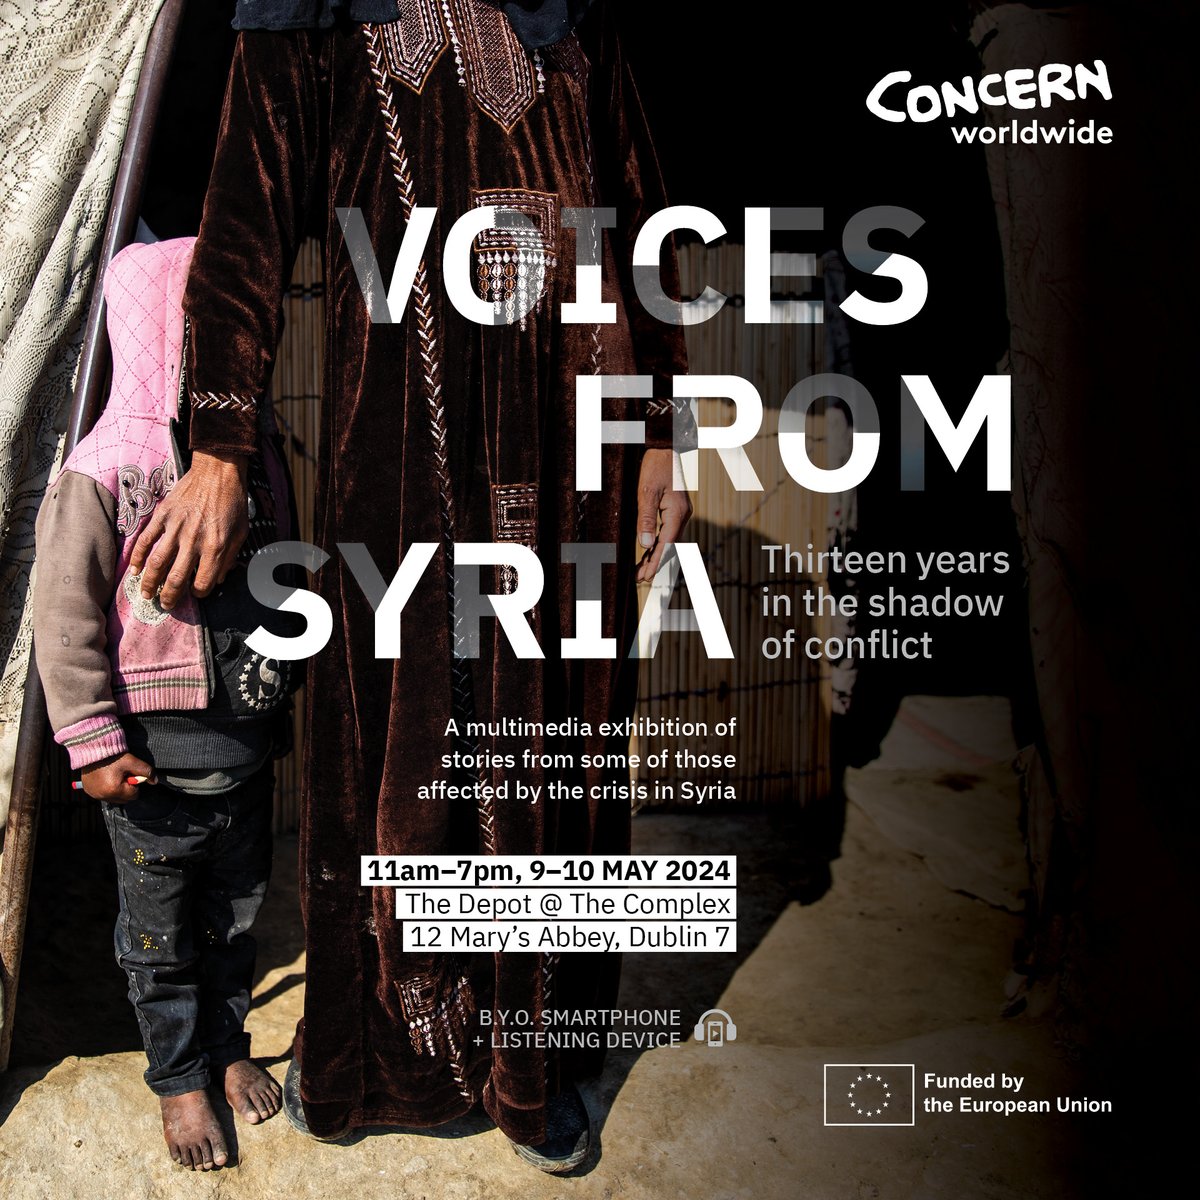 REMINDER: From 11am to 7pm today and tomorrow in The Depot @Concern present 'Voices From Syria' – a multimedia exhibition which takes viewers behind the headlines and allows them to hear the stories of those affected by the crisis. Read more: thecomplex.ie/event/voices-f…